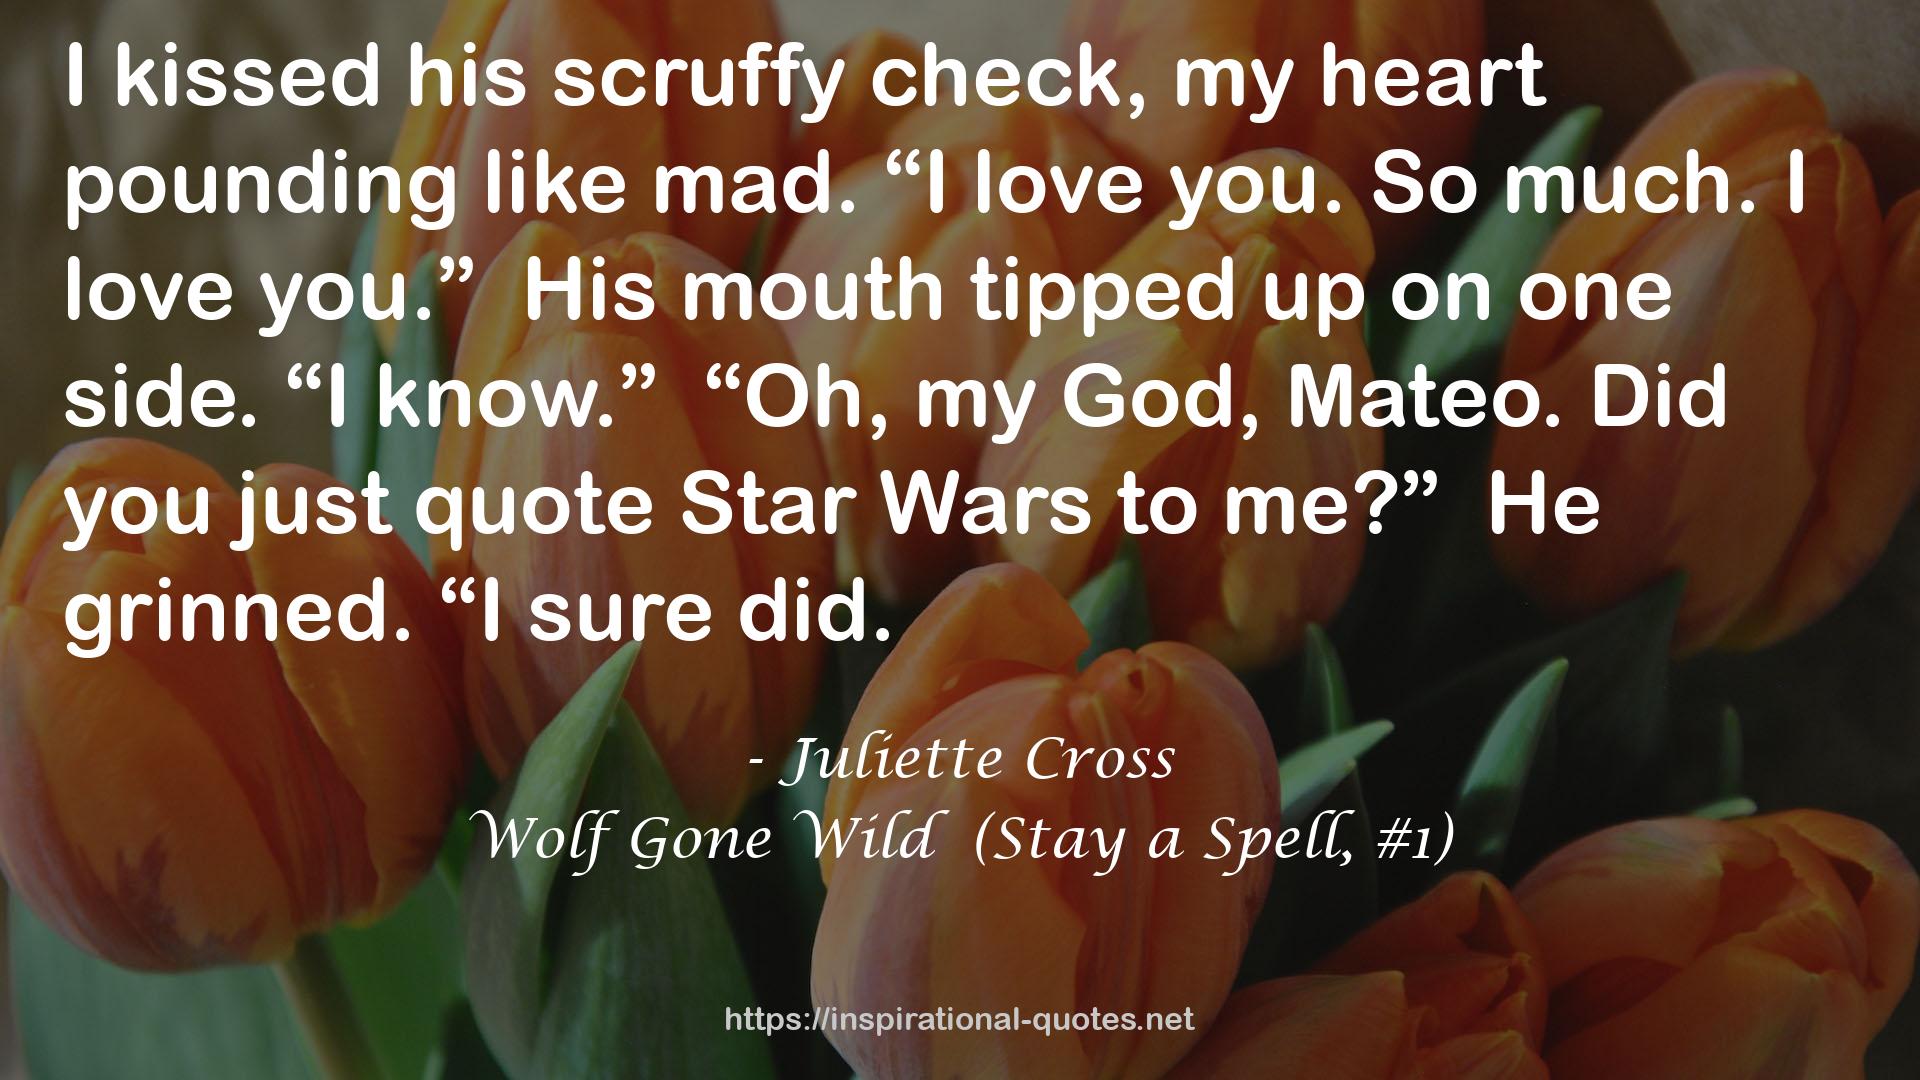 Wolf Gone Wild  (Stay a Spell, #1) QUOTES